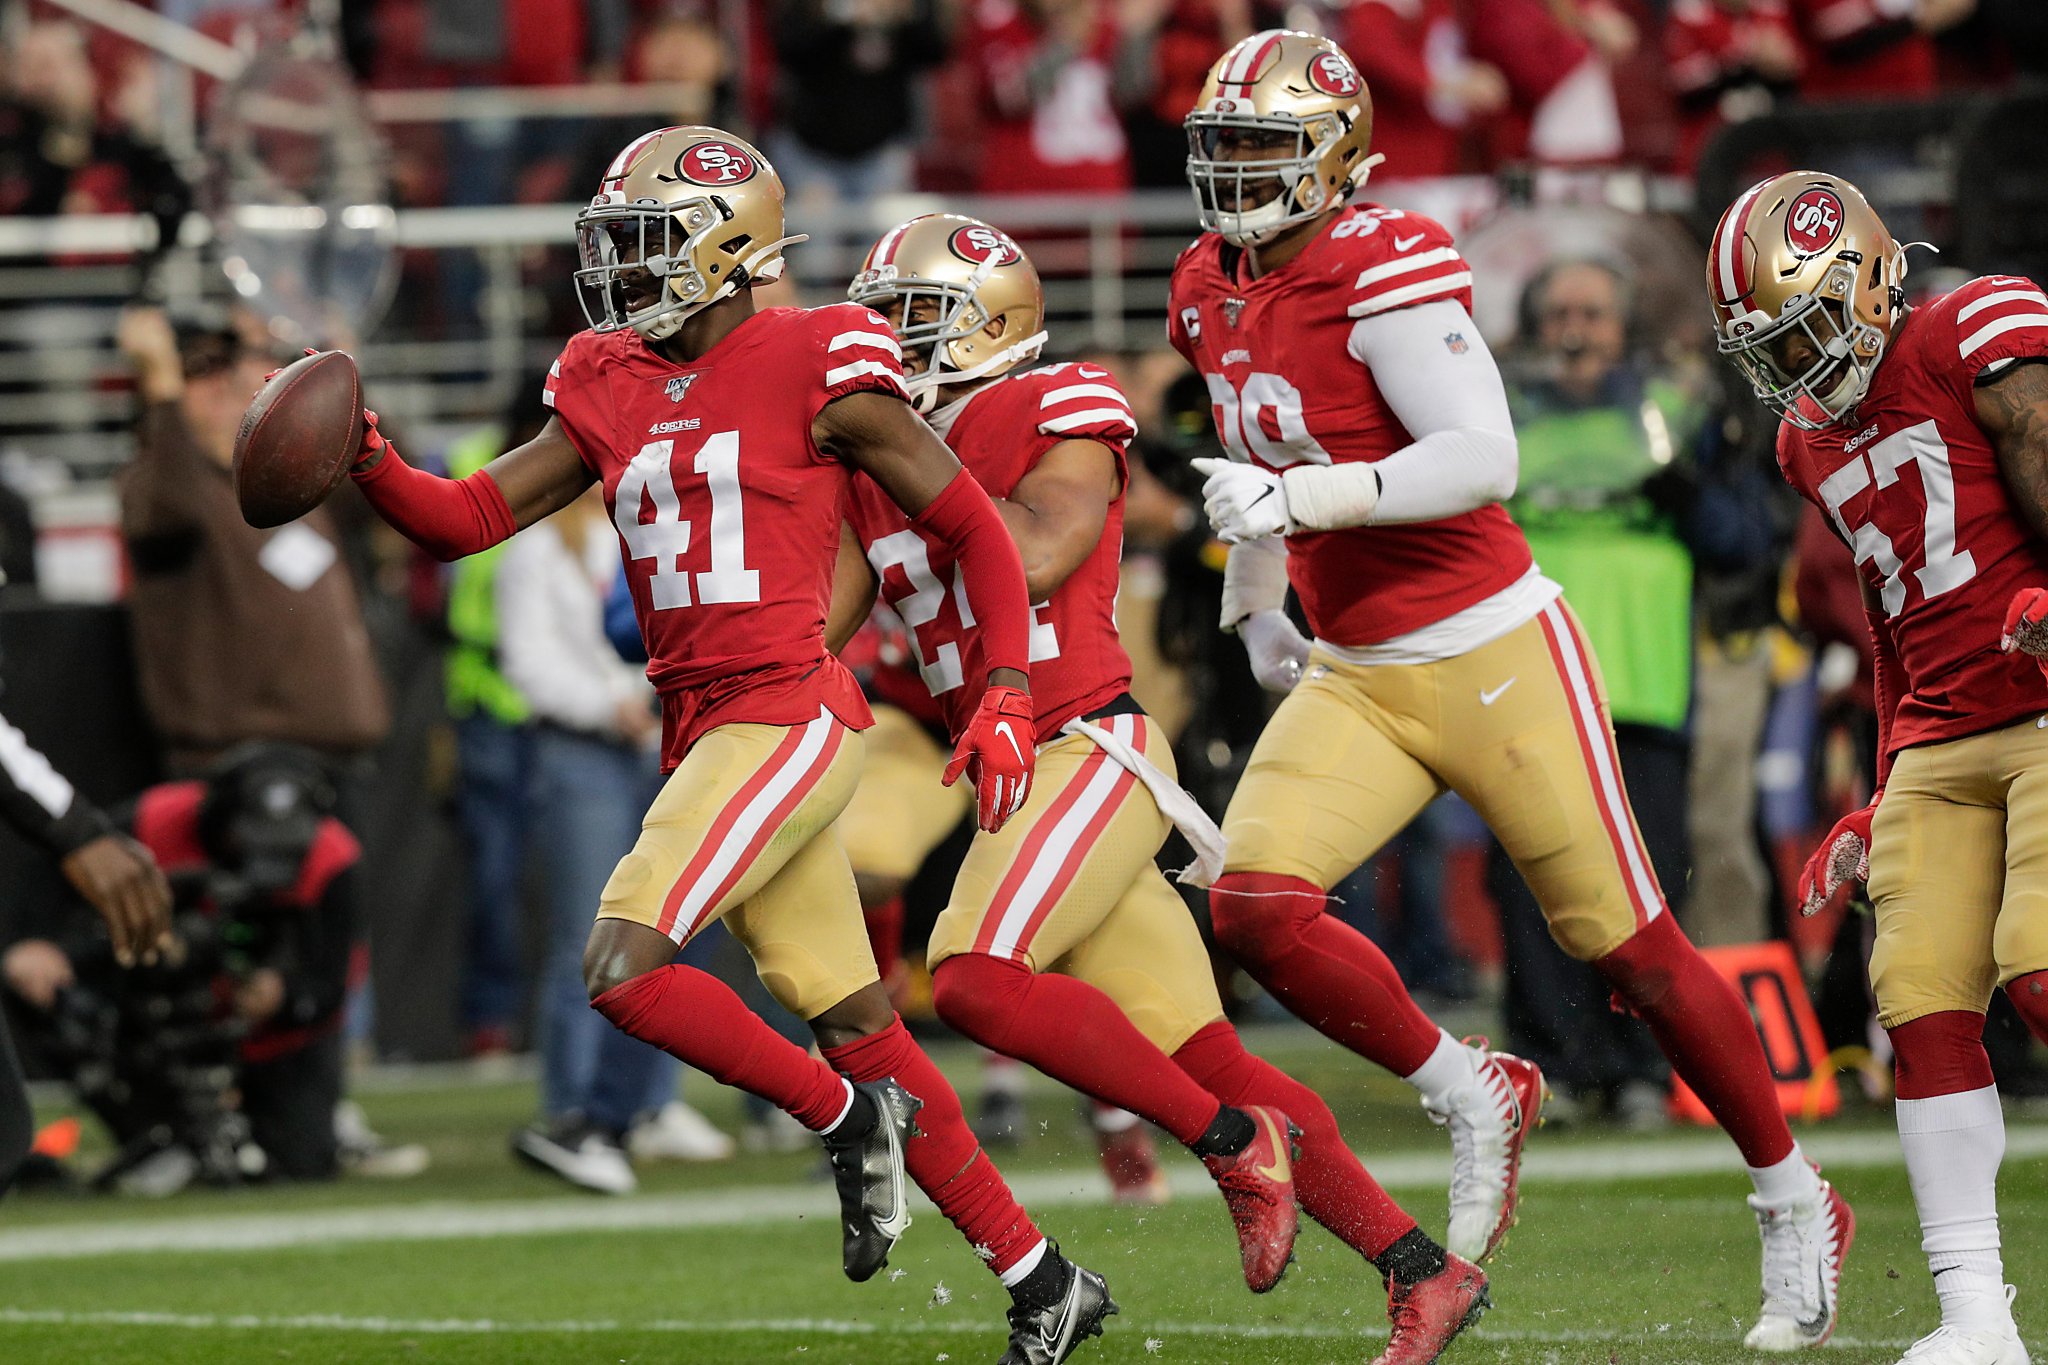 Twitter reacts to 49ers' blowout of Packers in NFC Championship Game